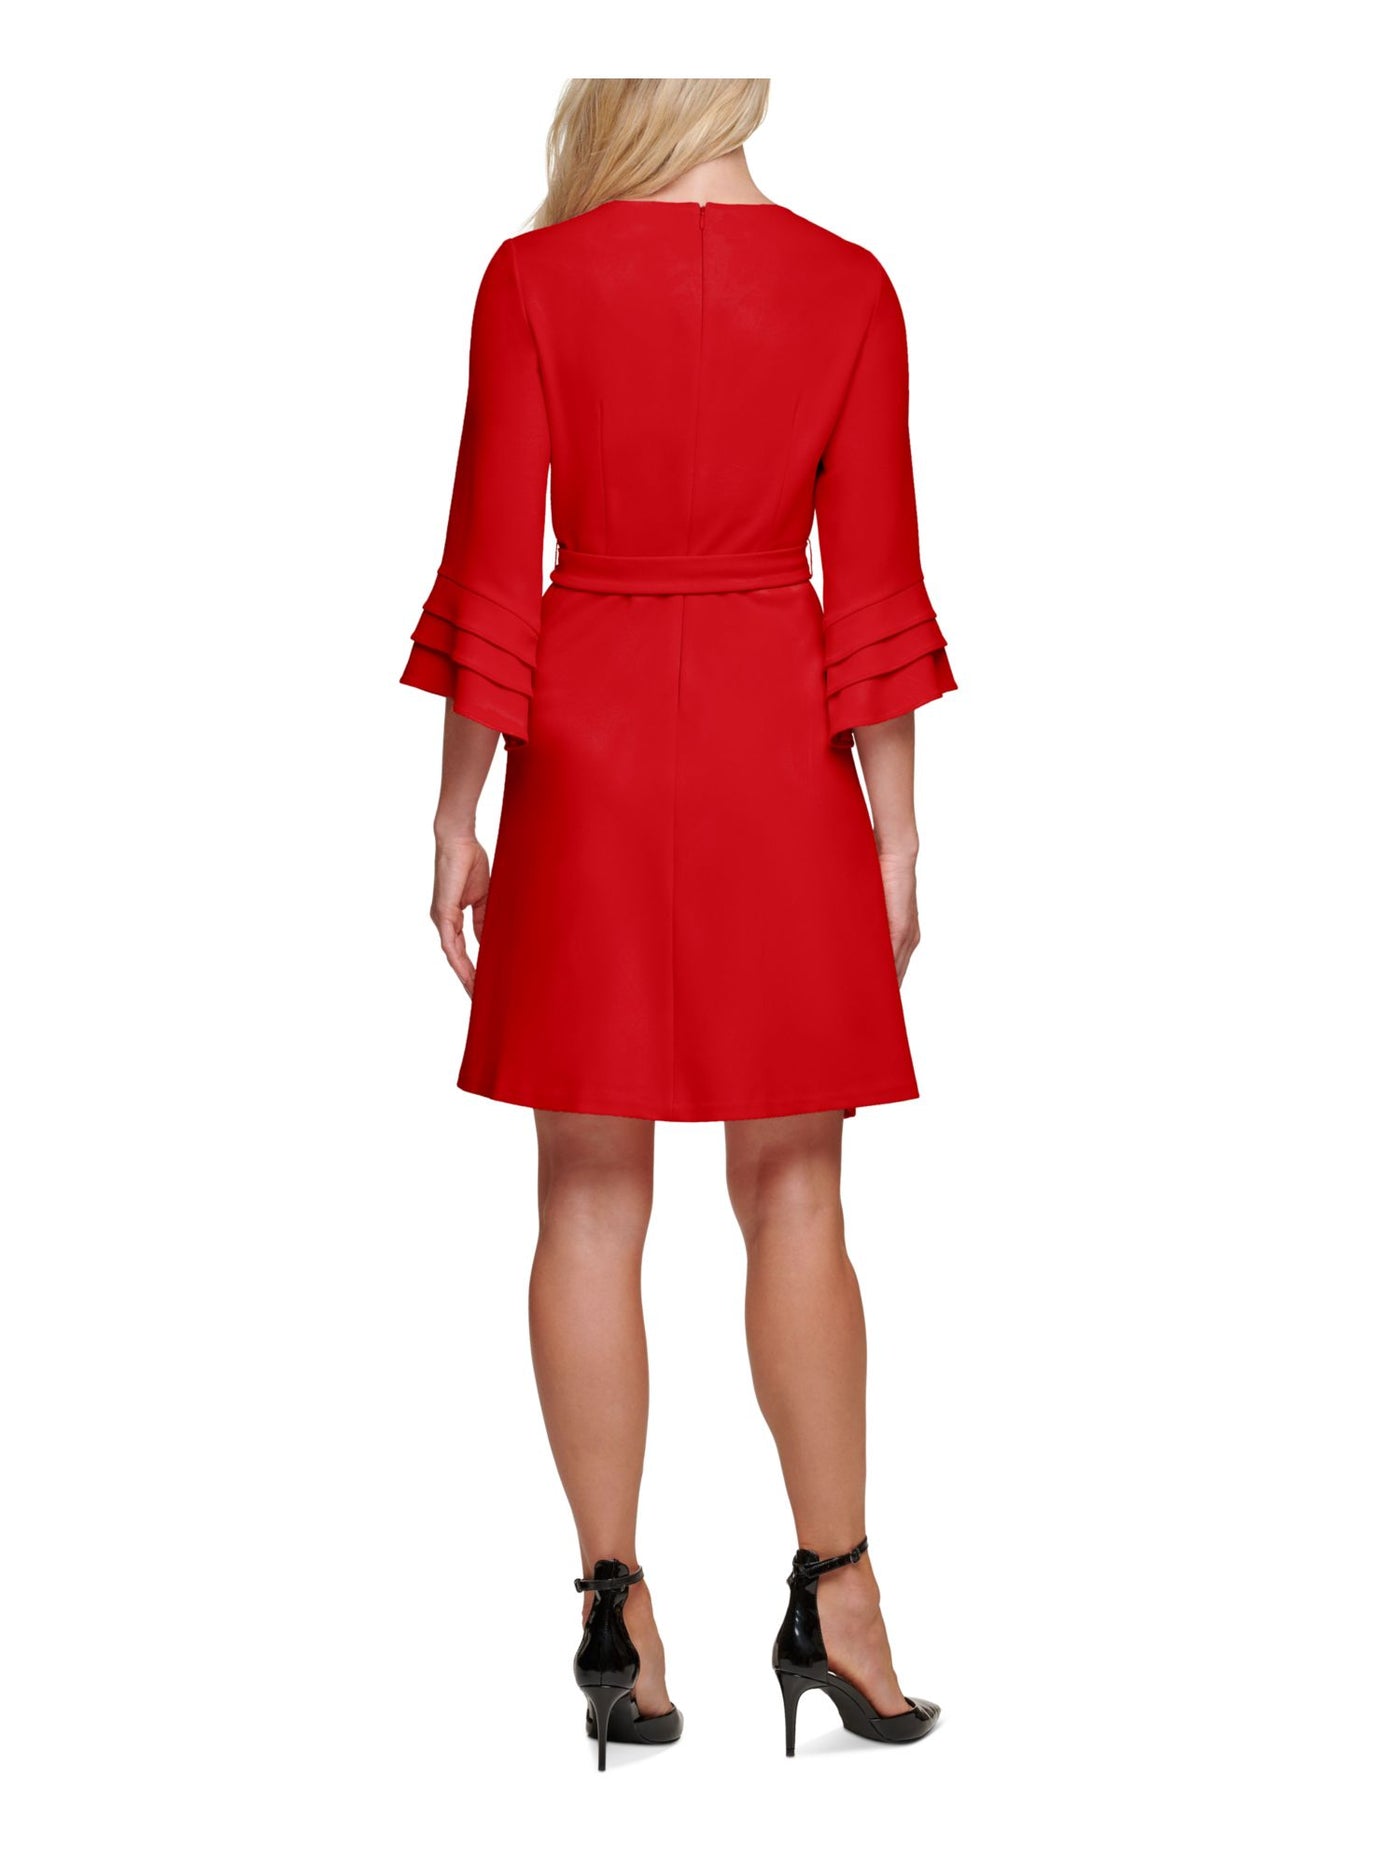 DKNY Womens Red Belted Zippered Textured Bell Sleeve Jewel Neck Above The Knee Wear To Work A-Line Dress 2